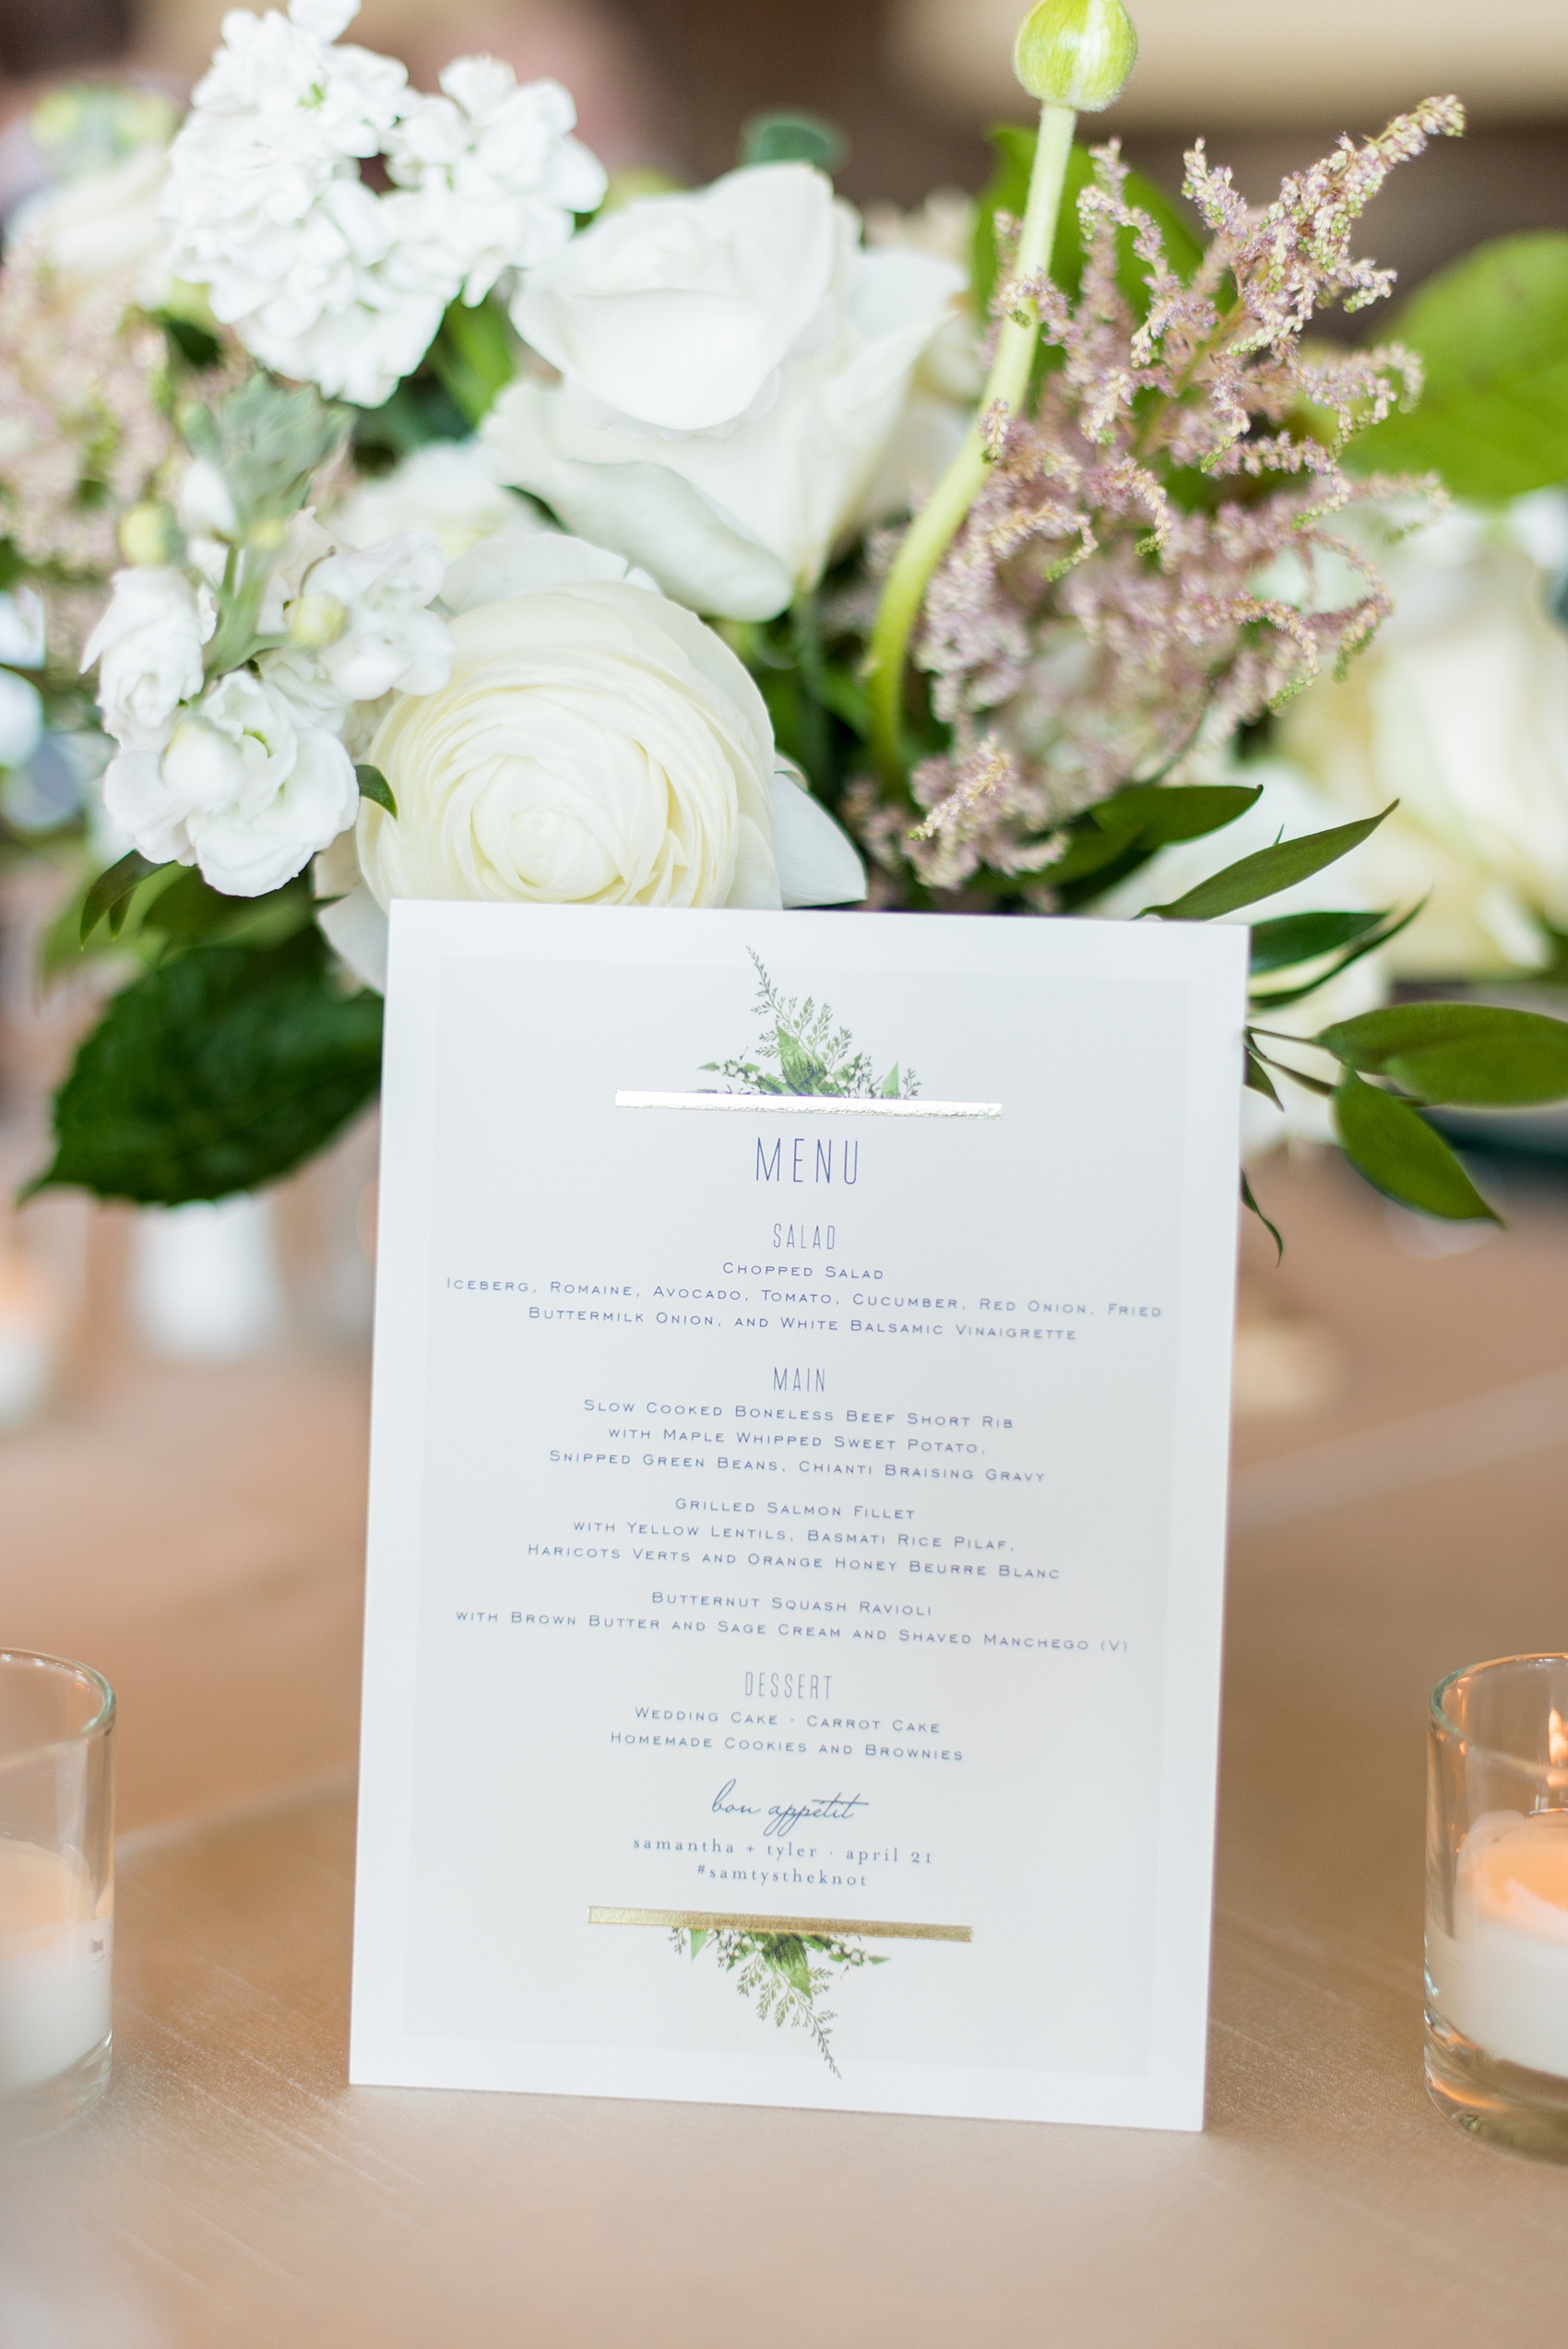 Saratoga Springs destination wedding photos by Mikkel Paige Photography. The spring event was held at Saratoga National Golf Club venue. The reception room was decorated in a green and gold color palette including candlelight and beautiful floral centerpieces. Custom stationery was highlighted throughout the day including menus. #SaratogaSpringsNY #SaratogaSprings #mikkelpaige #NYwedding #destinationwedding #saratogaweddingvenue #golfcoursewedding #customdraping #springwedding